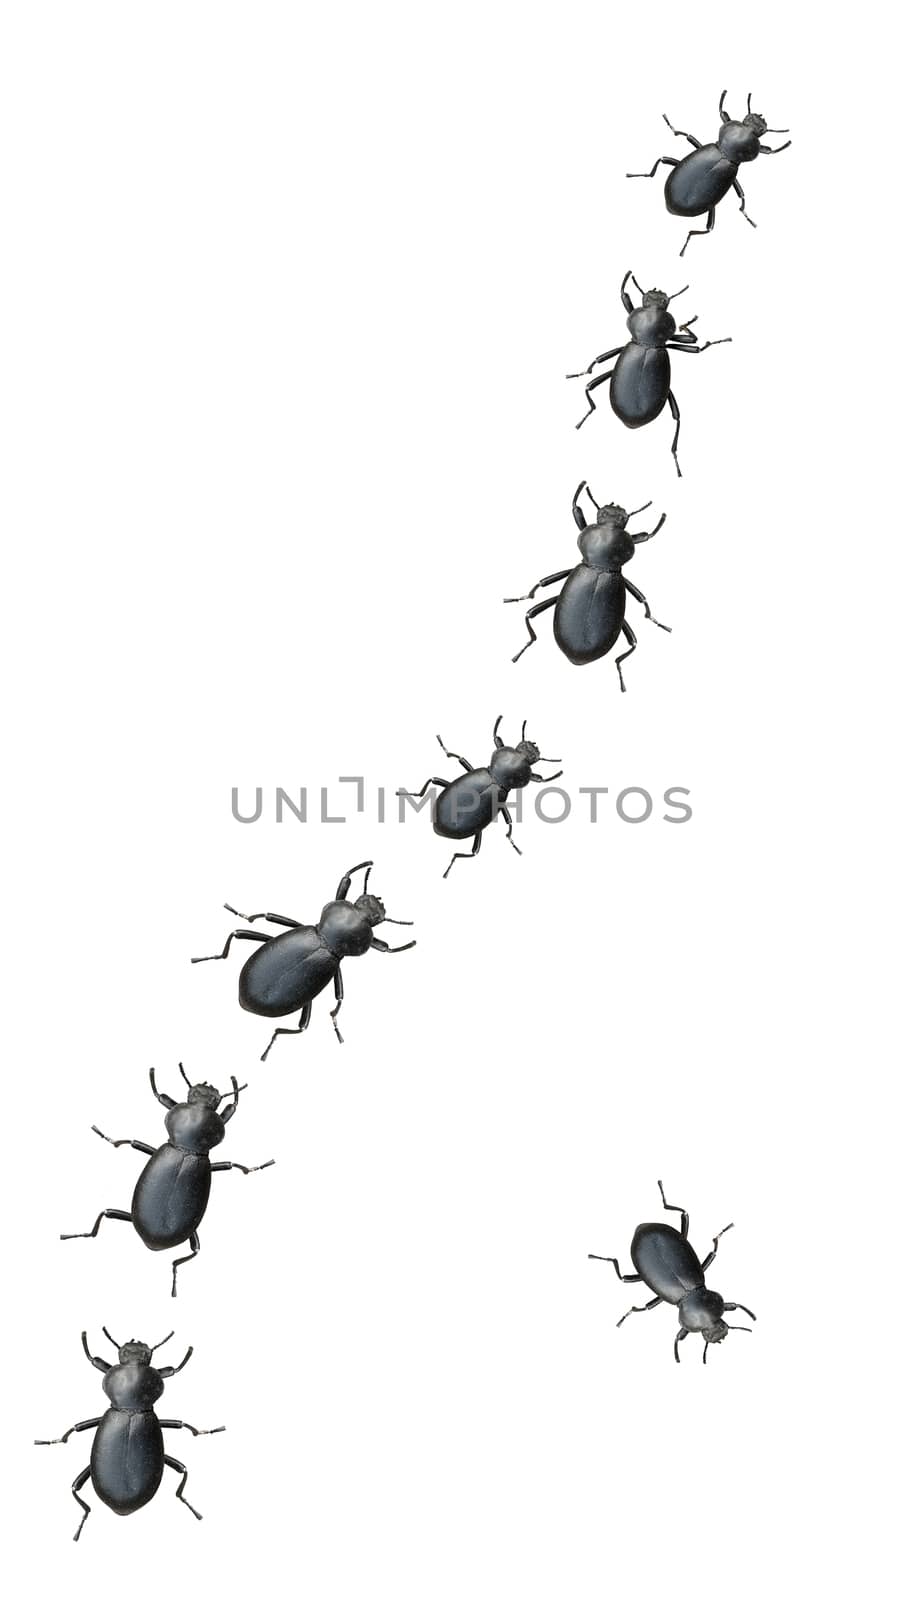 Black Beetles Marching In A Line by mrdoomits